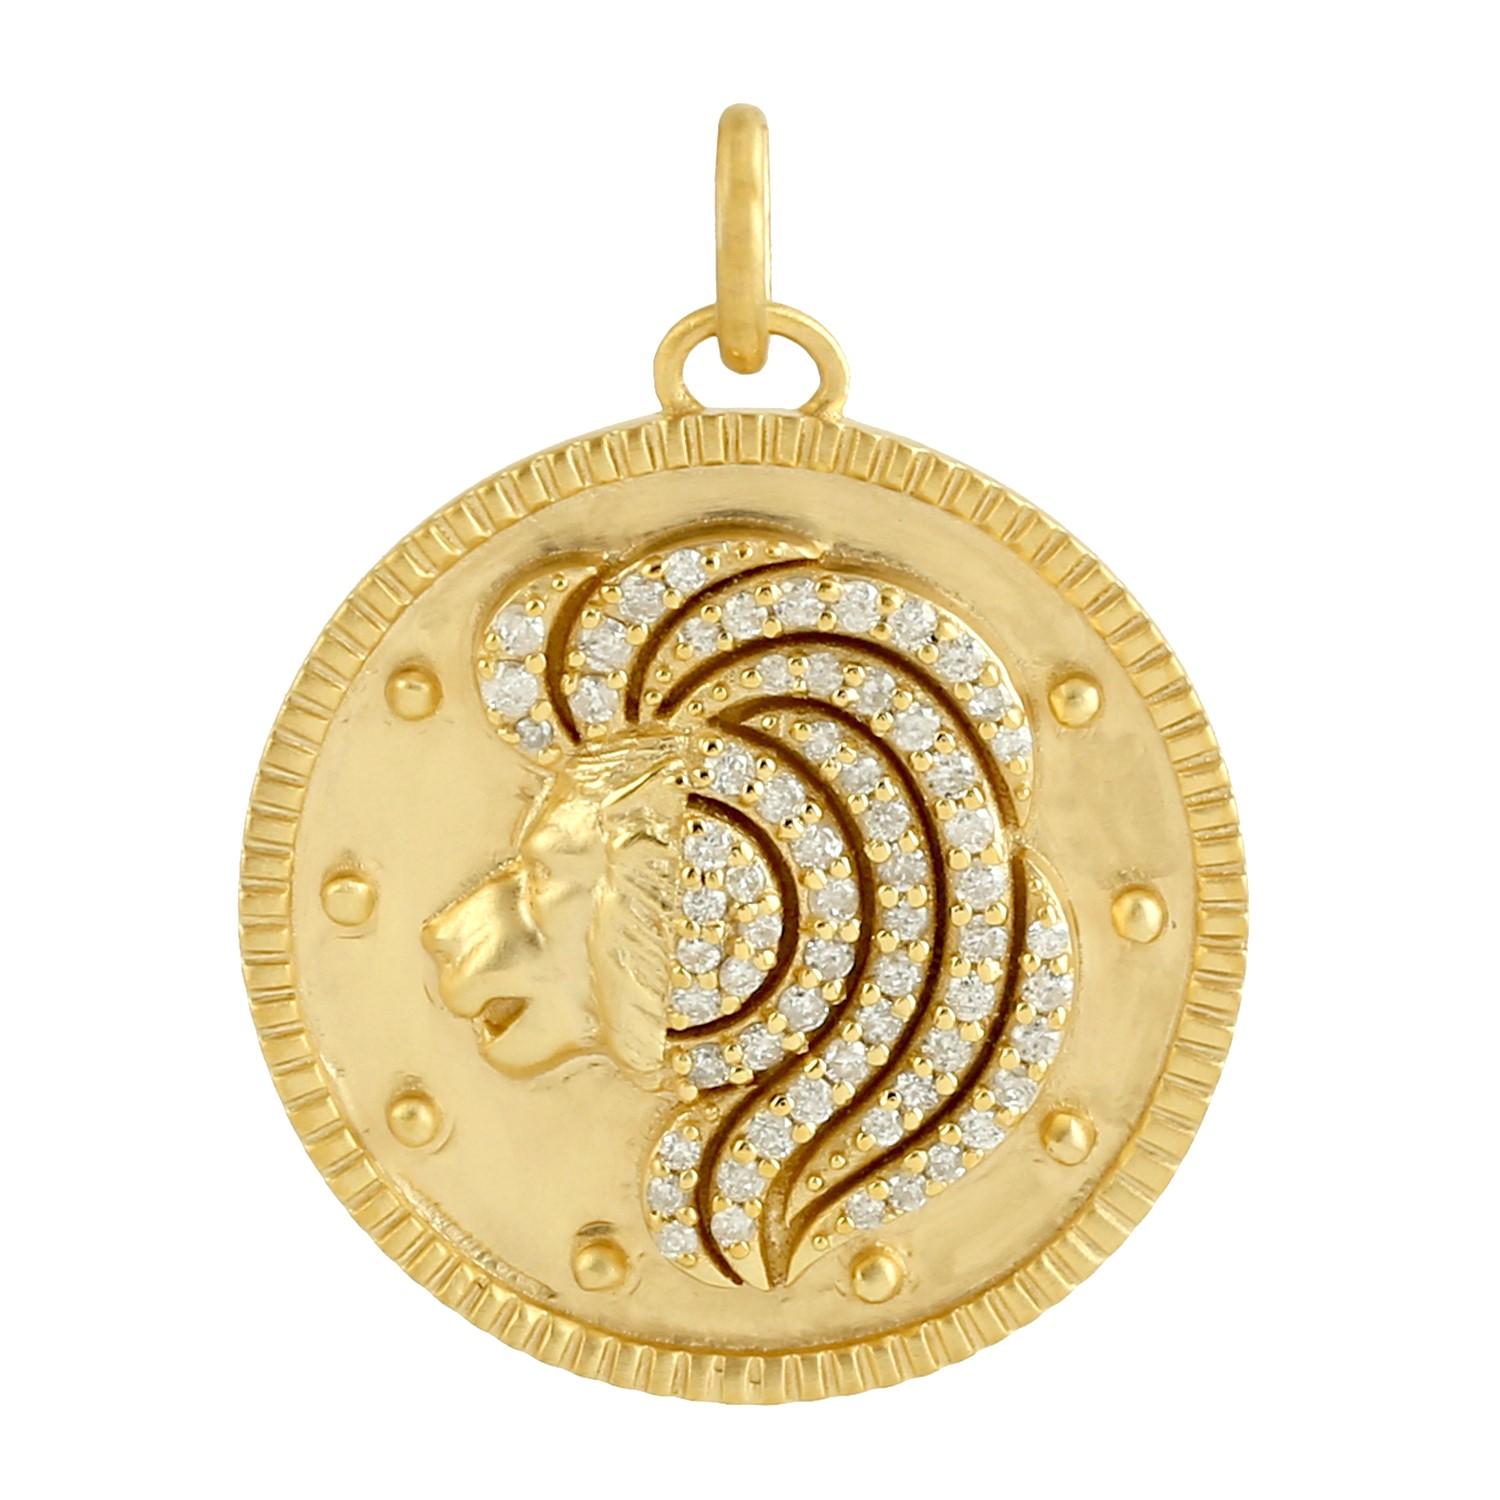 Contemporary Meghna Jewels Zodiac Leo Medallion Charm 14K Yellow Gold Pendant Necklace For Sale